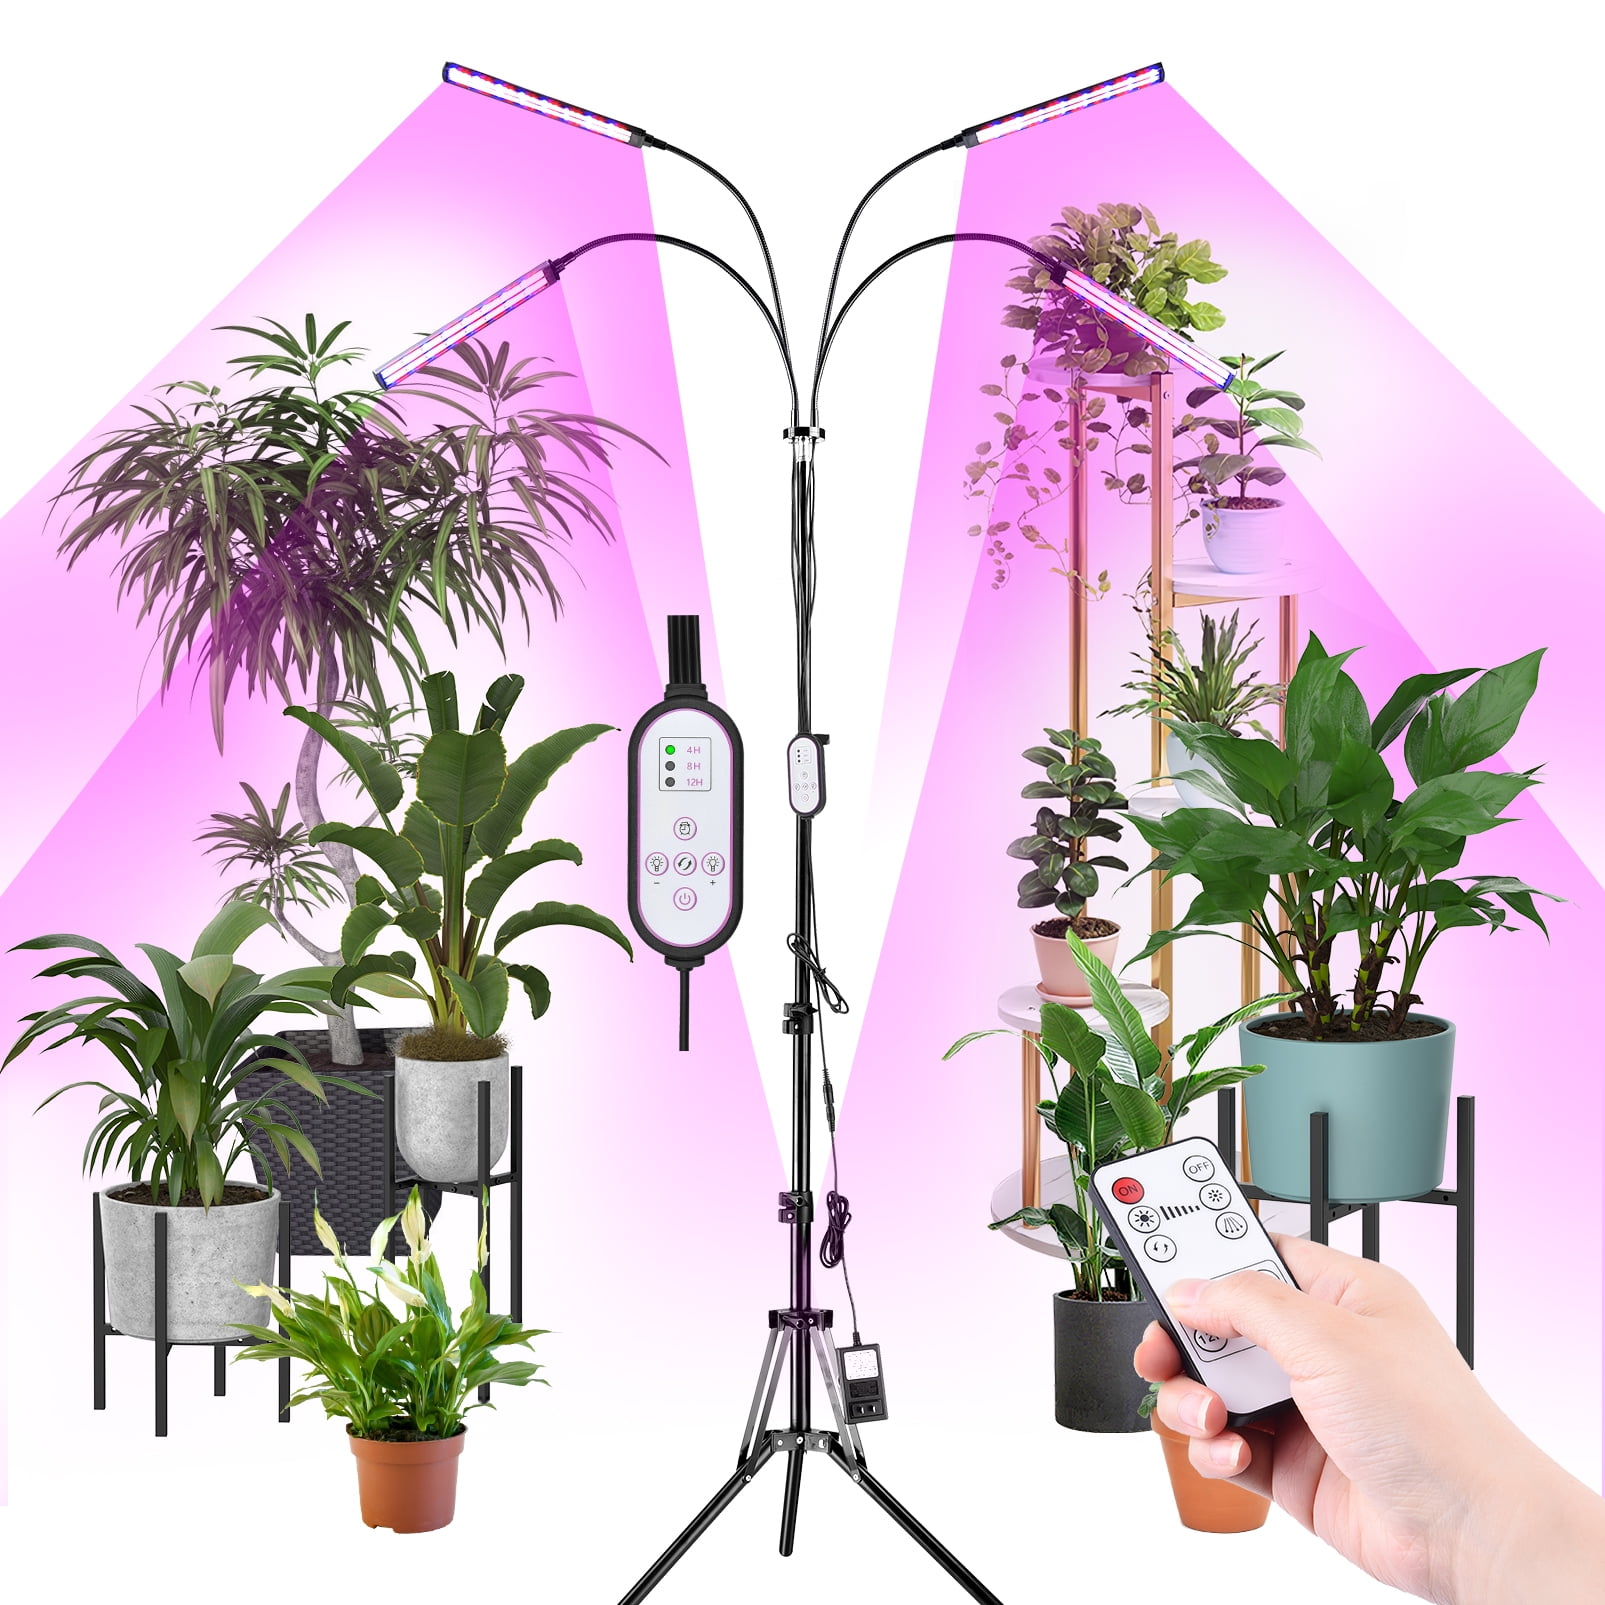 Remote Control for Ten-Head Grow Light